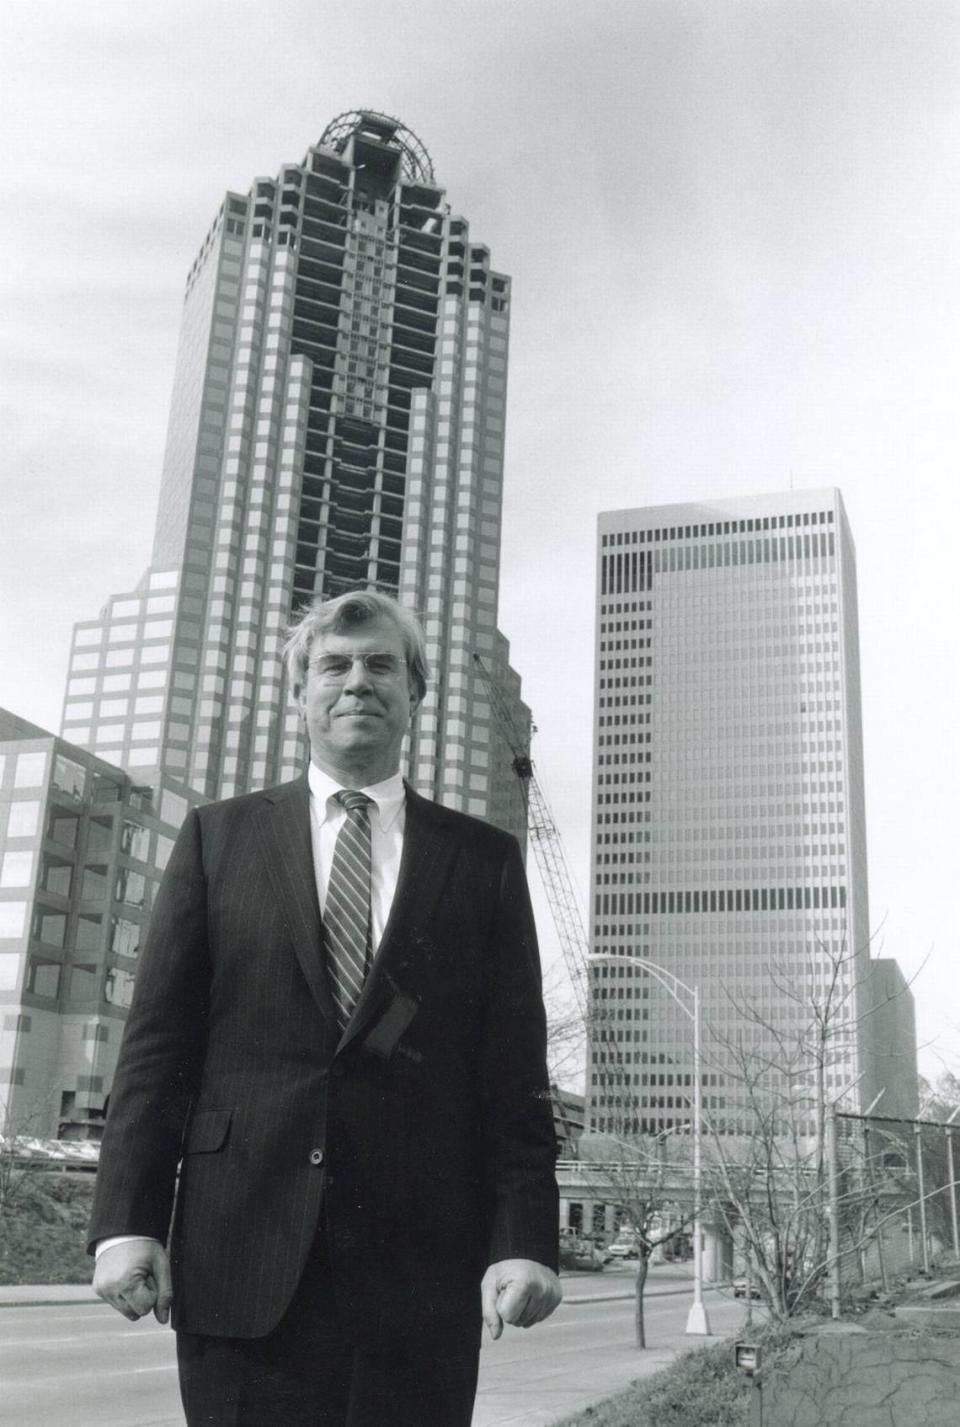 Although known for his hard-charging ways, Ed Crutchfield once said an admonishment from his mother, Katherine, encouraged him to develop a warm workplace for his thousands of employees at First Union. He’s seen here in a 1998 file photo in front of the bank’s new building.